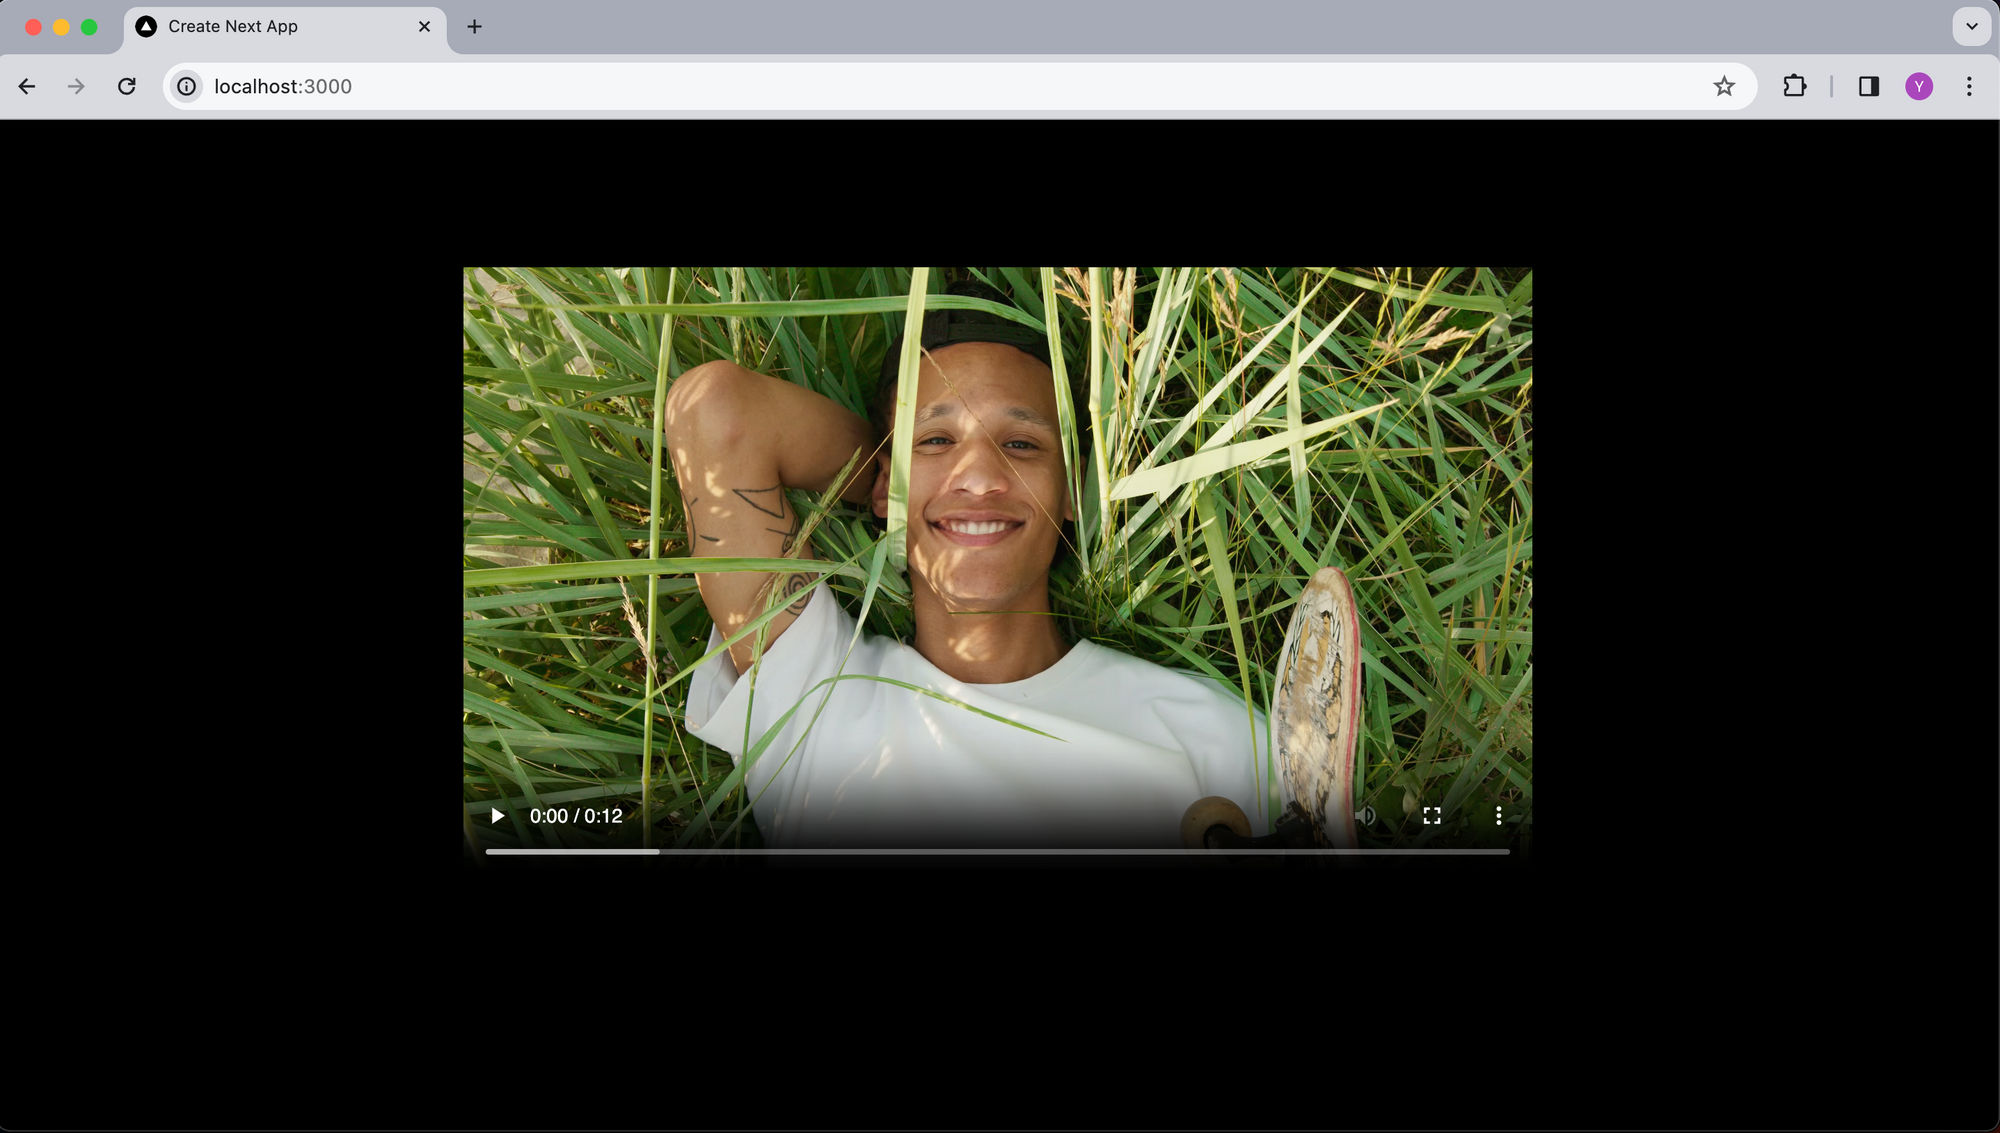 Adding video player in Next.js